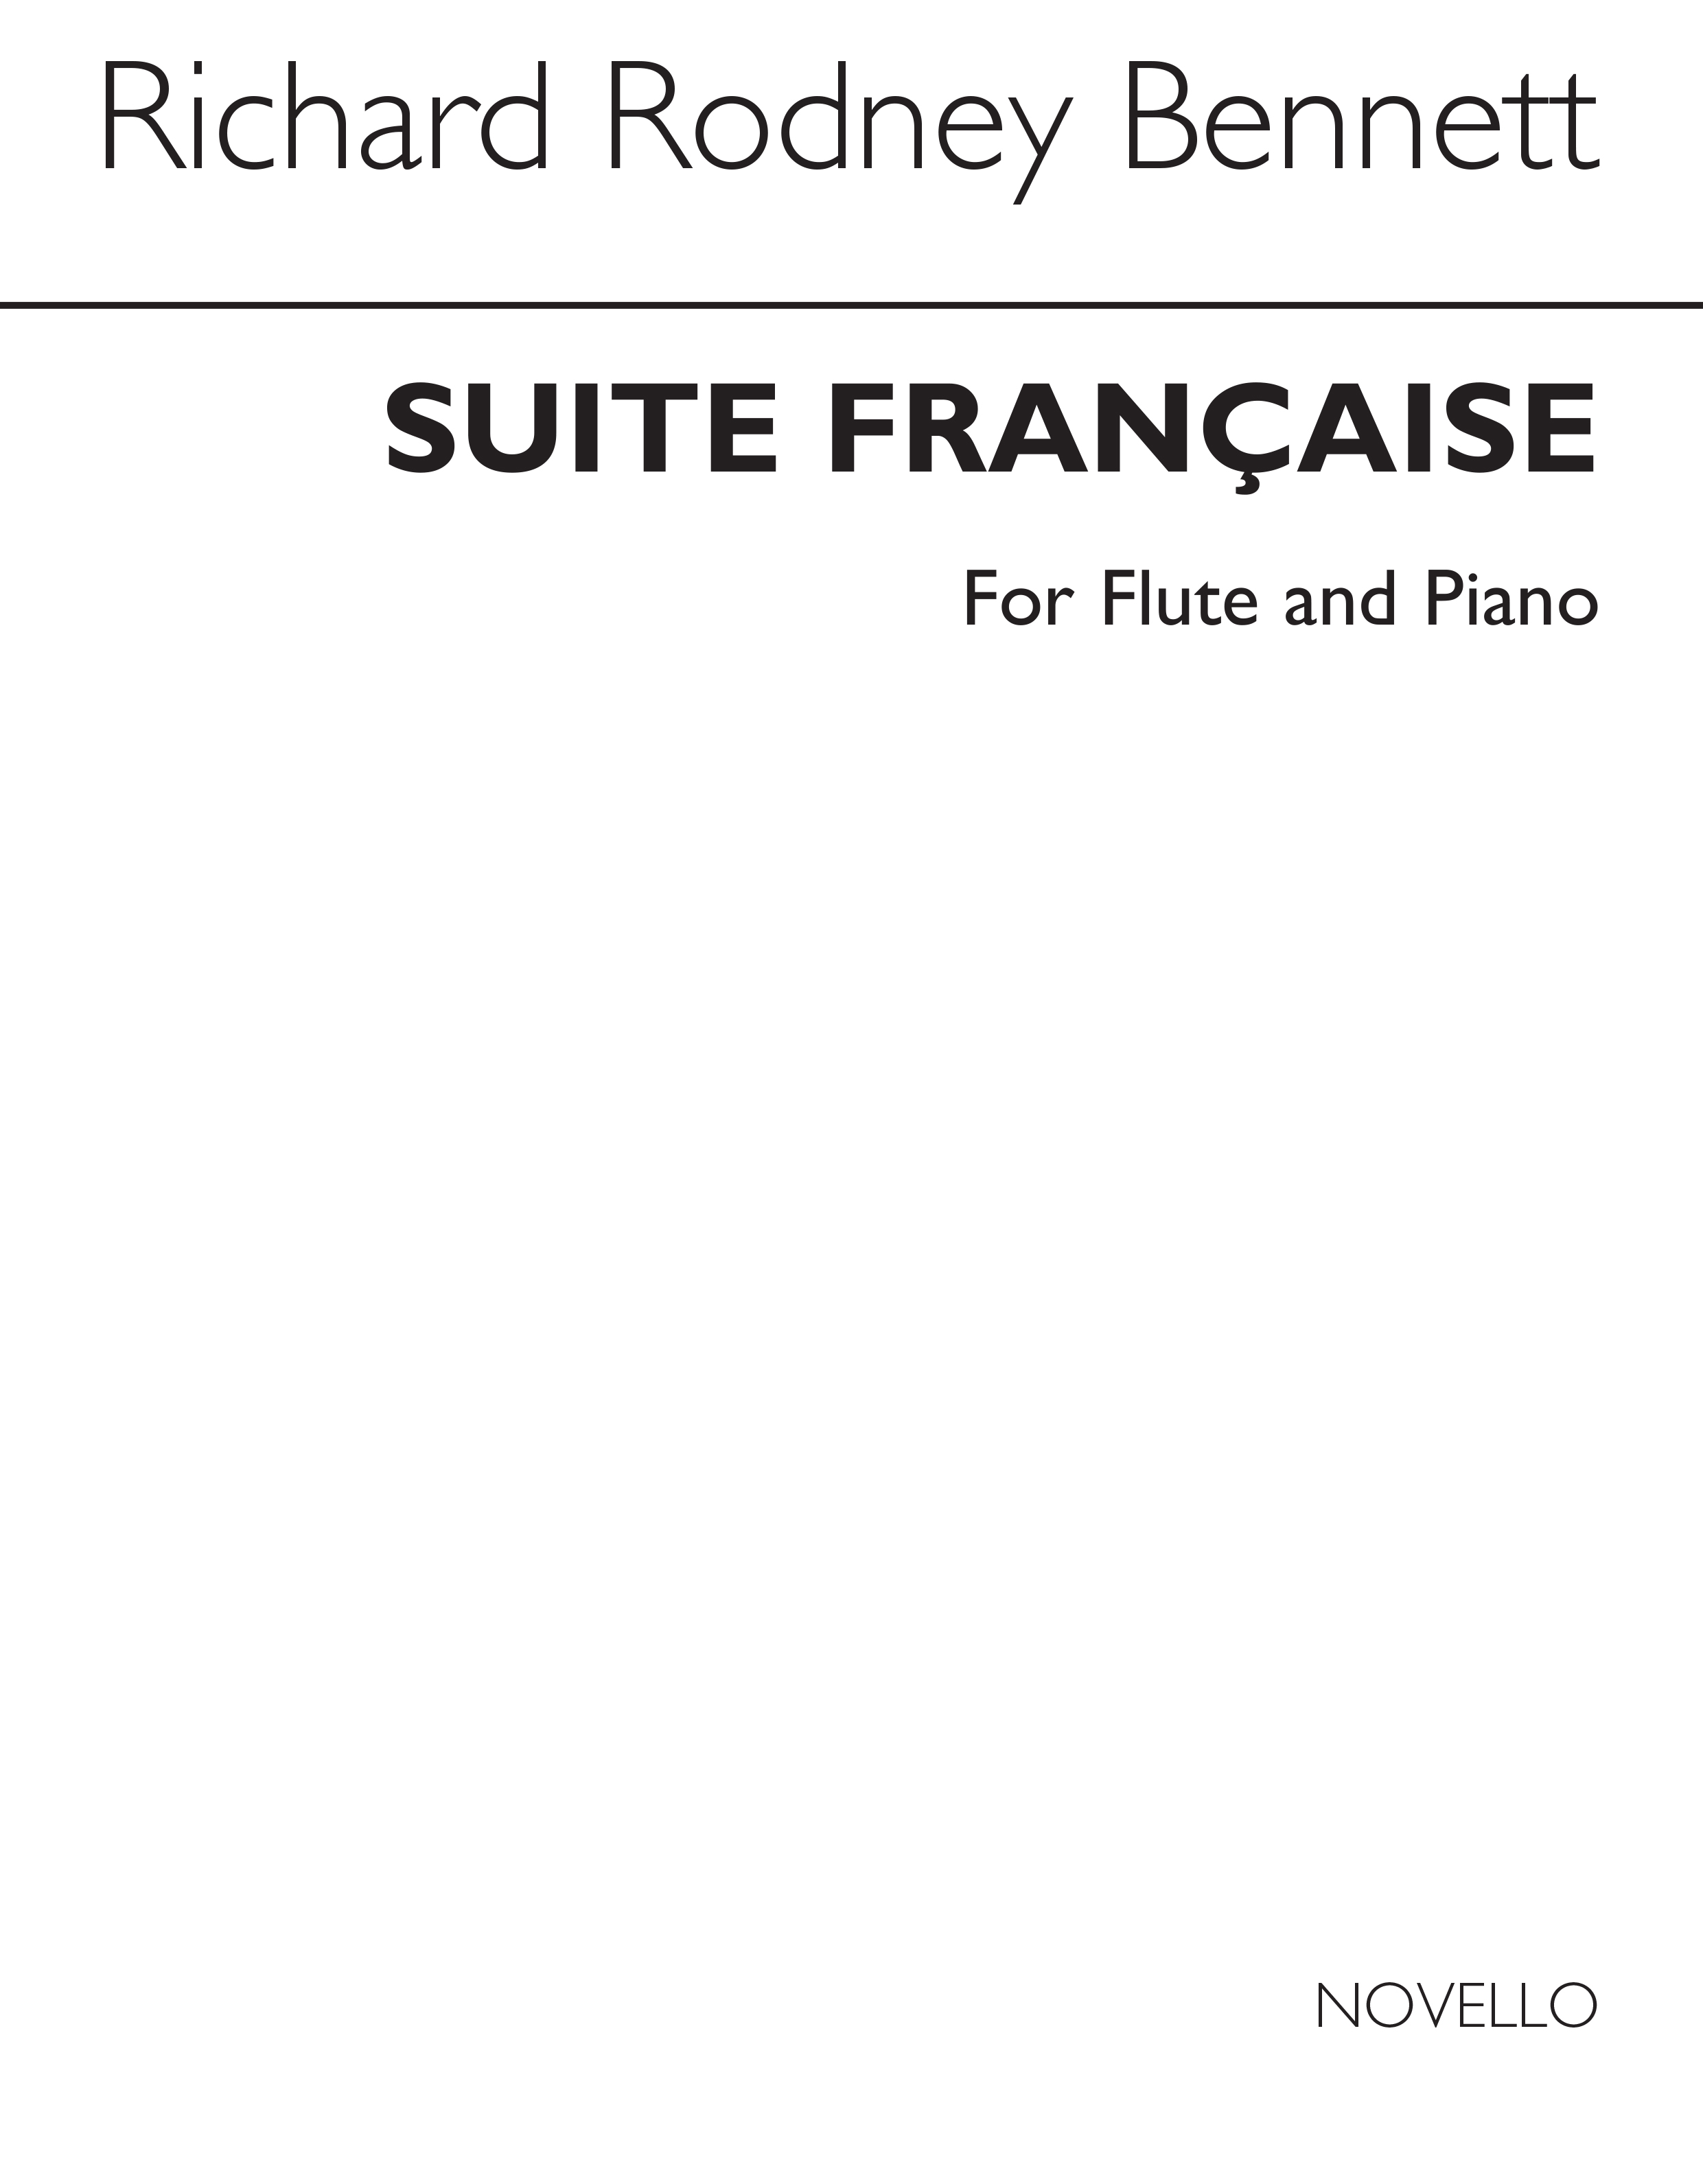 Richard Rodney Bennett: Suite Francaise For Flute And Piano: Flute: Score and